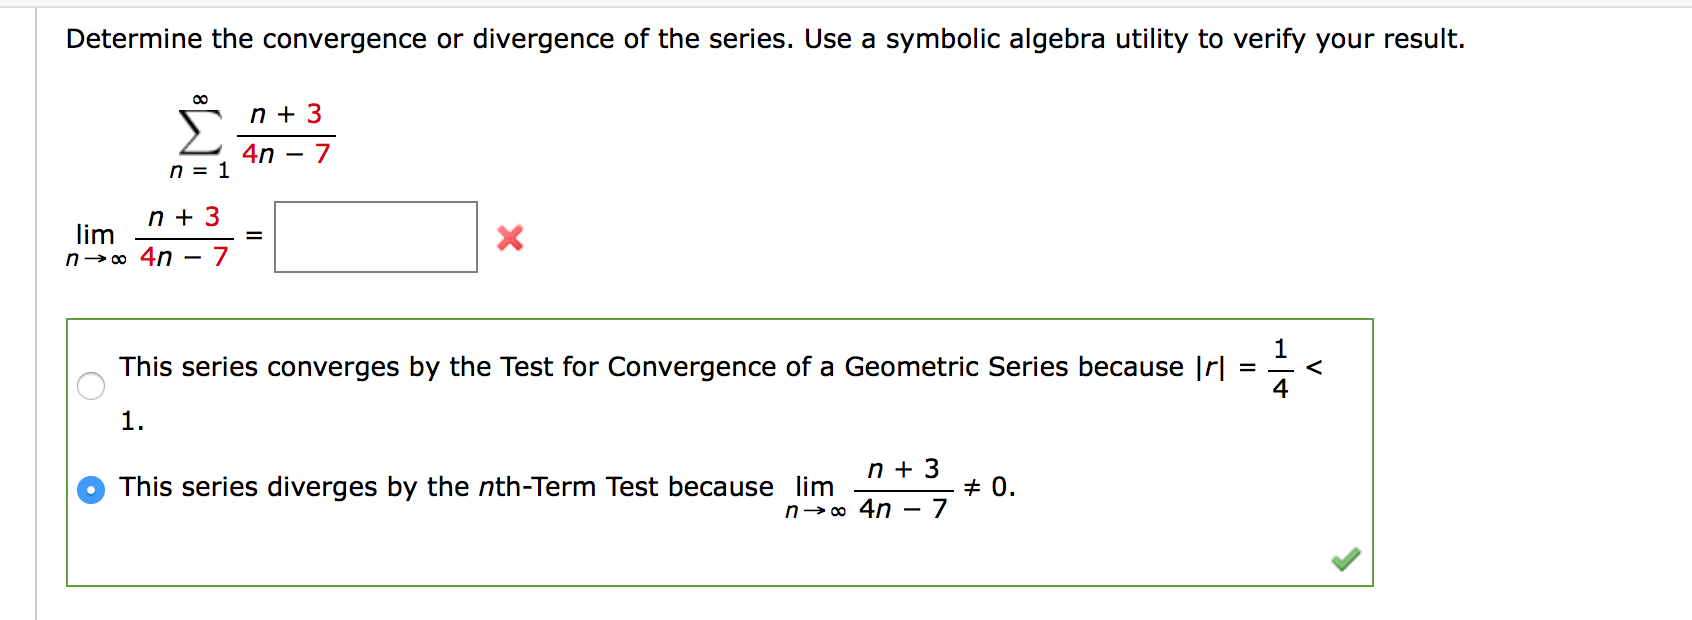 Determine the convergence or divergence of the series. Use a symbolic algebra utility to verify your result.
00
n + 3
4n
n = 1
n + 3
lim
n→o 4n - 7
This series converges by the Test for Convergence of a Geometric Series because |r|
1
<
1.
n + 3
This series diverges by the nth-Term Test because lim
+ 0.
n→o 4n – .
